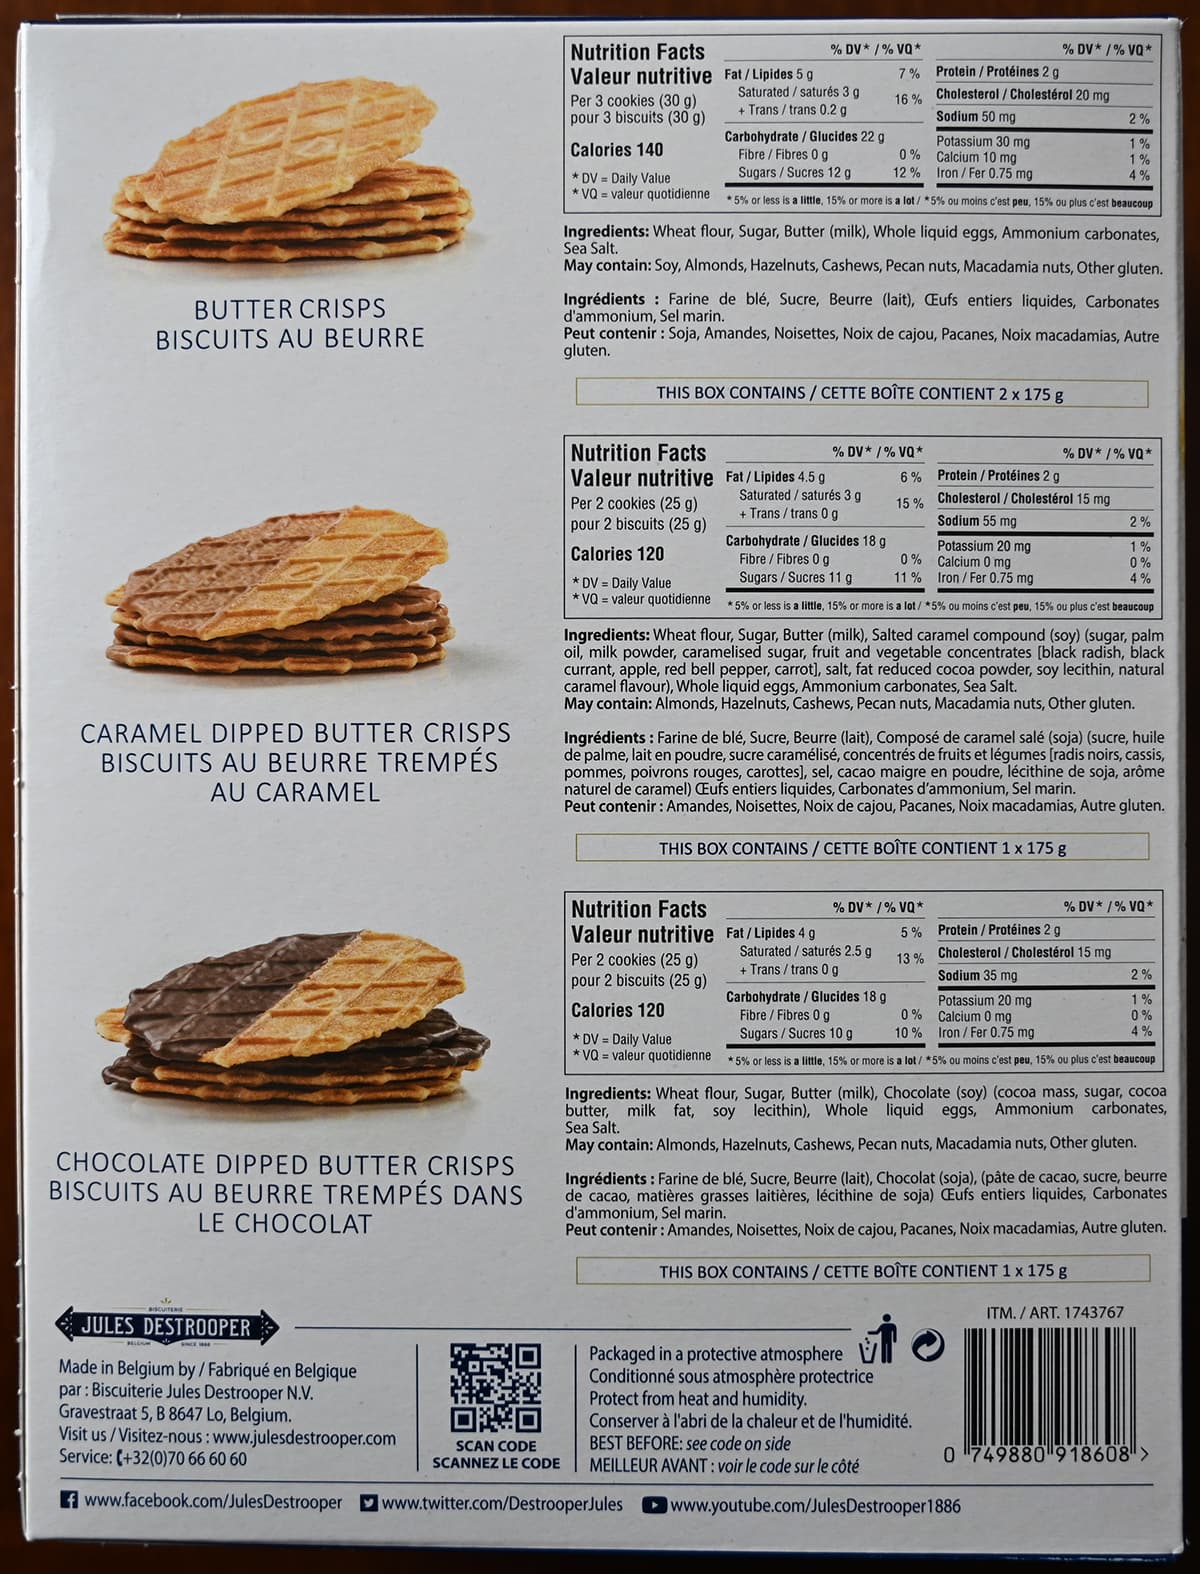 Image of the back of the box of biscuits showing ingredients, nutrition facts and where they are made.